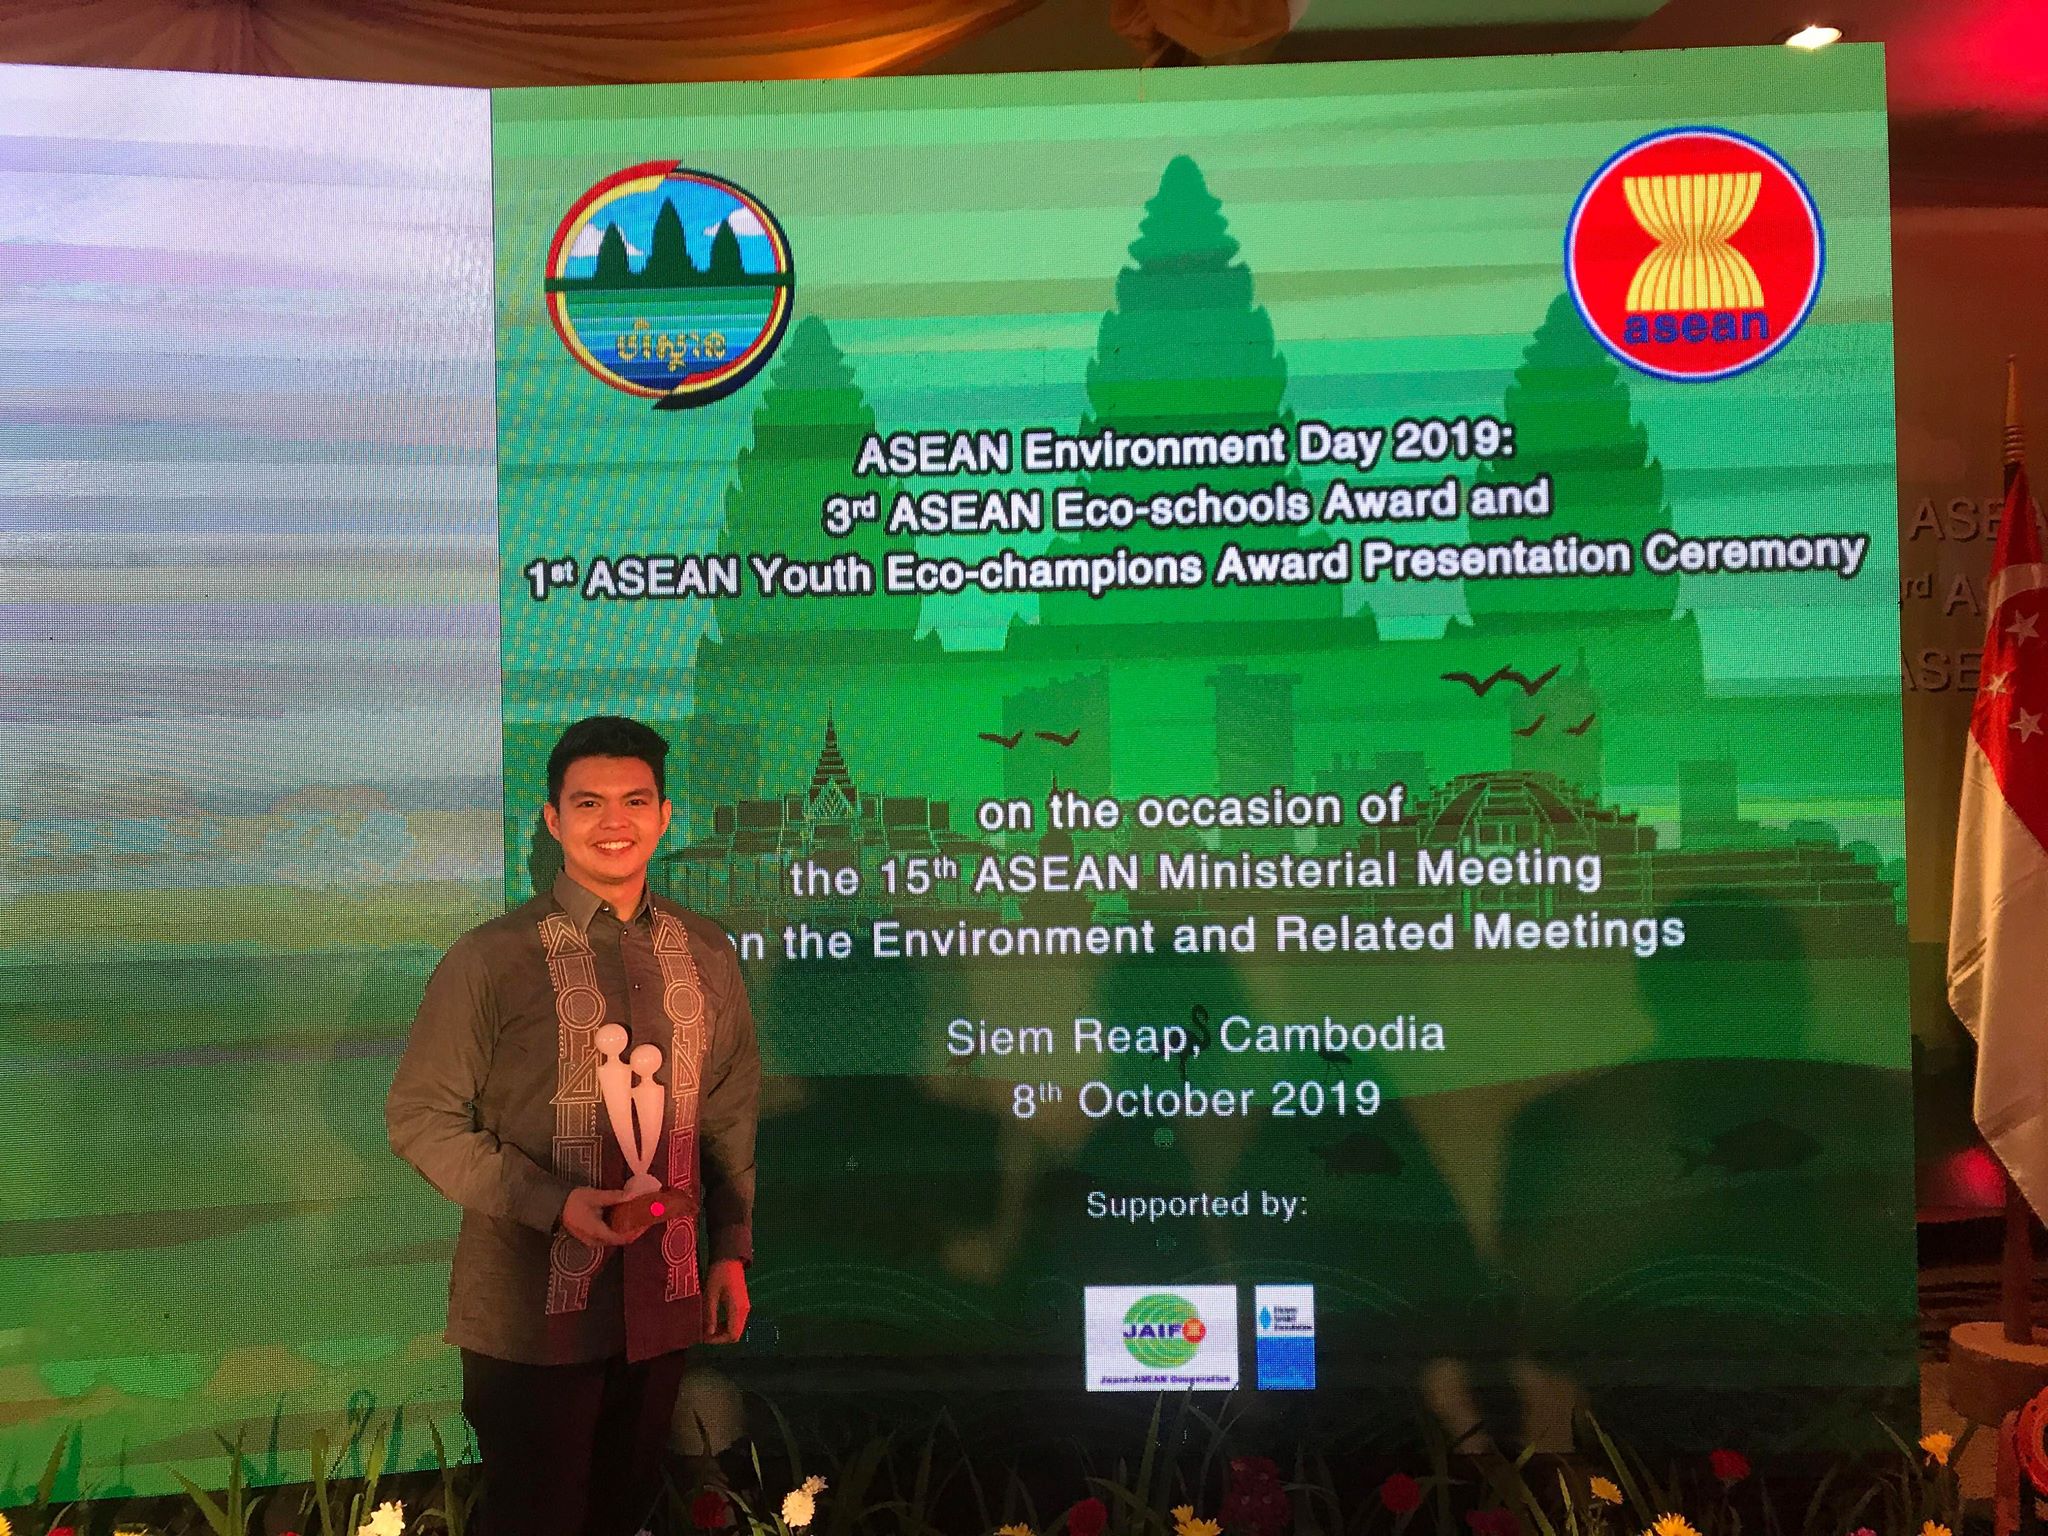 CMC alum receives 1st ASEAN Youth Eco-Champion Award for PH